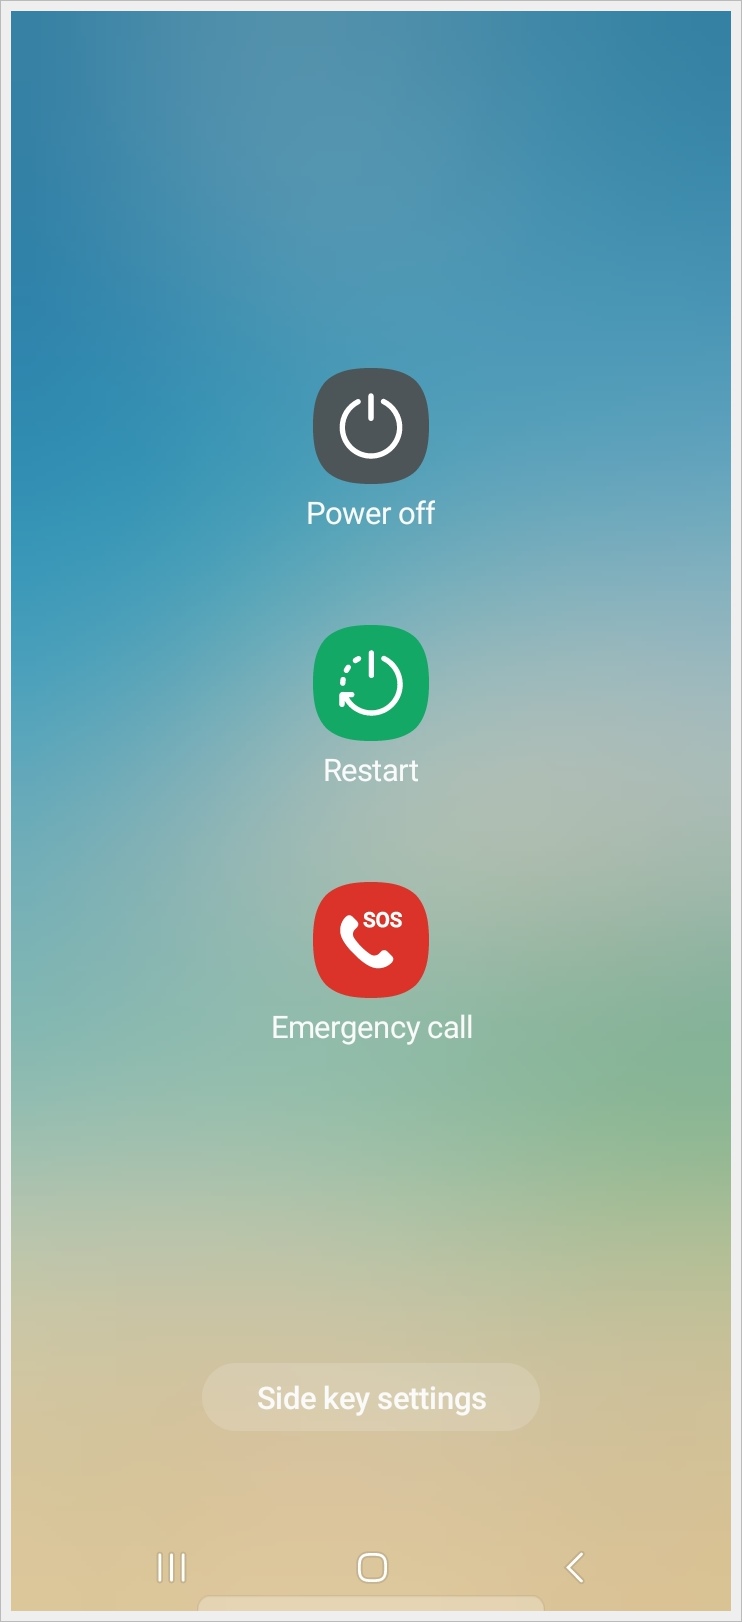 This image displays a screenshot of a Samsung phone, showcasing the 'Power off,' 'Restart,' and 'Emergency call' buttons.